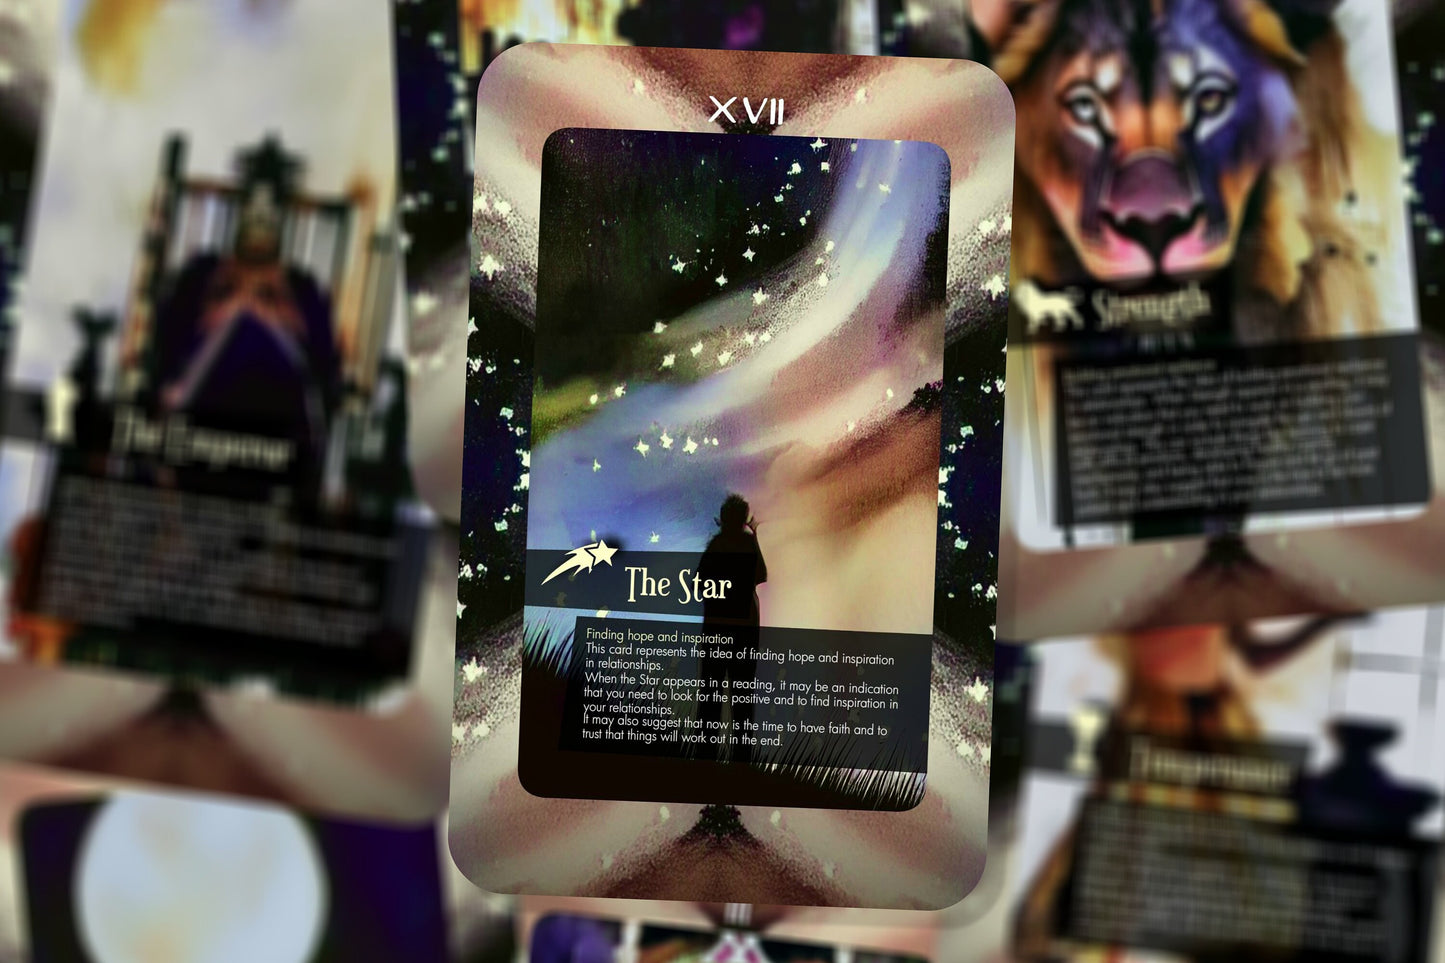 Tarot for Love and Relationships - Explore the connections that shape your life - Major Arcana